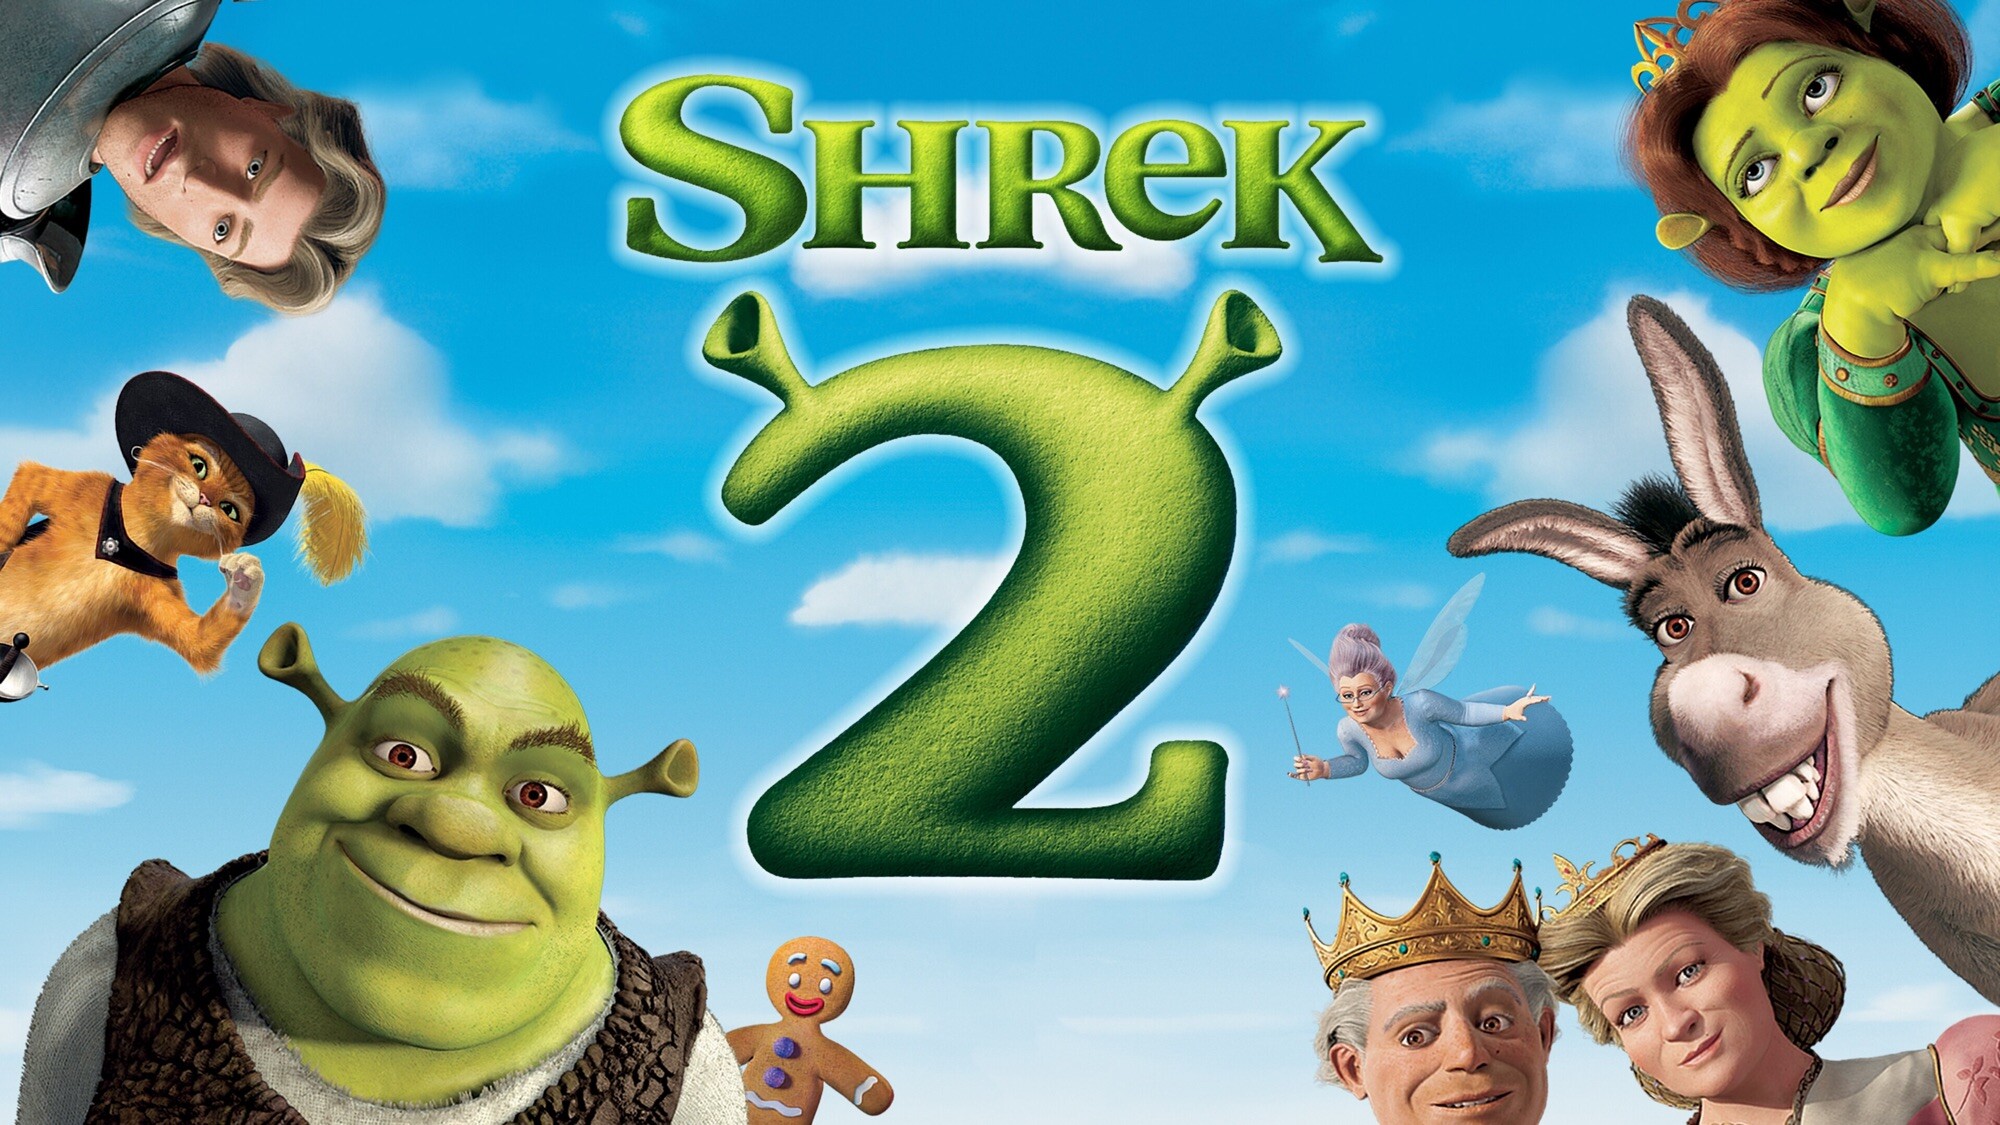 Shrek: The second installment in the franchise, The film was directed by Andrew Adamson, Kelly Asbury, and Conrad Vernon. 2000x1130 HD Background.